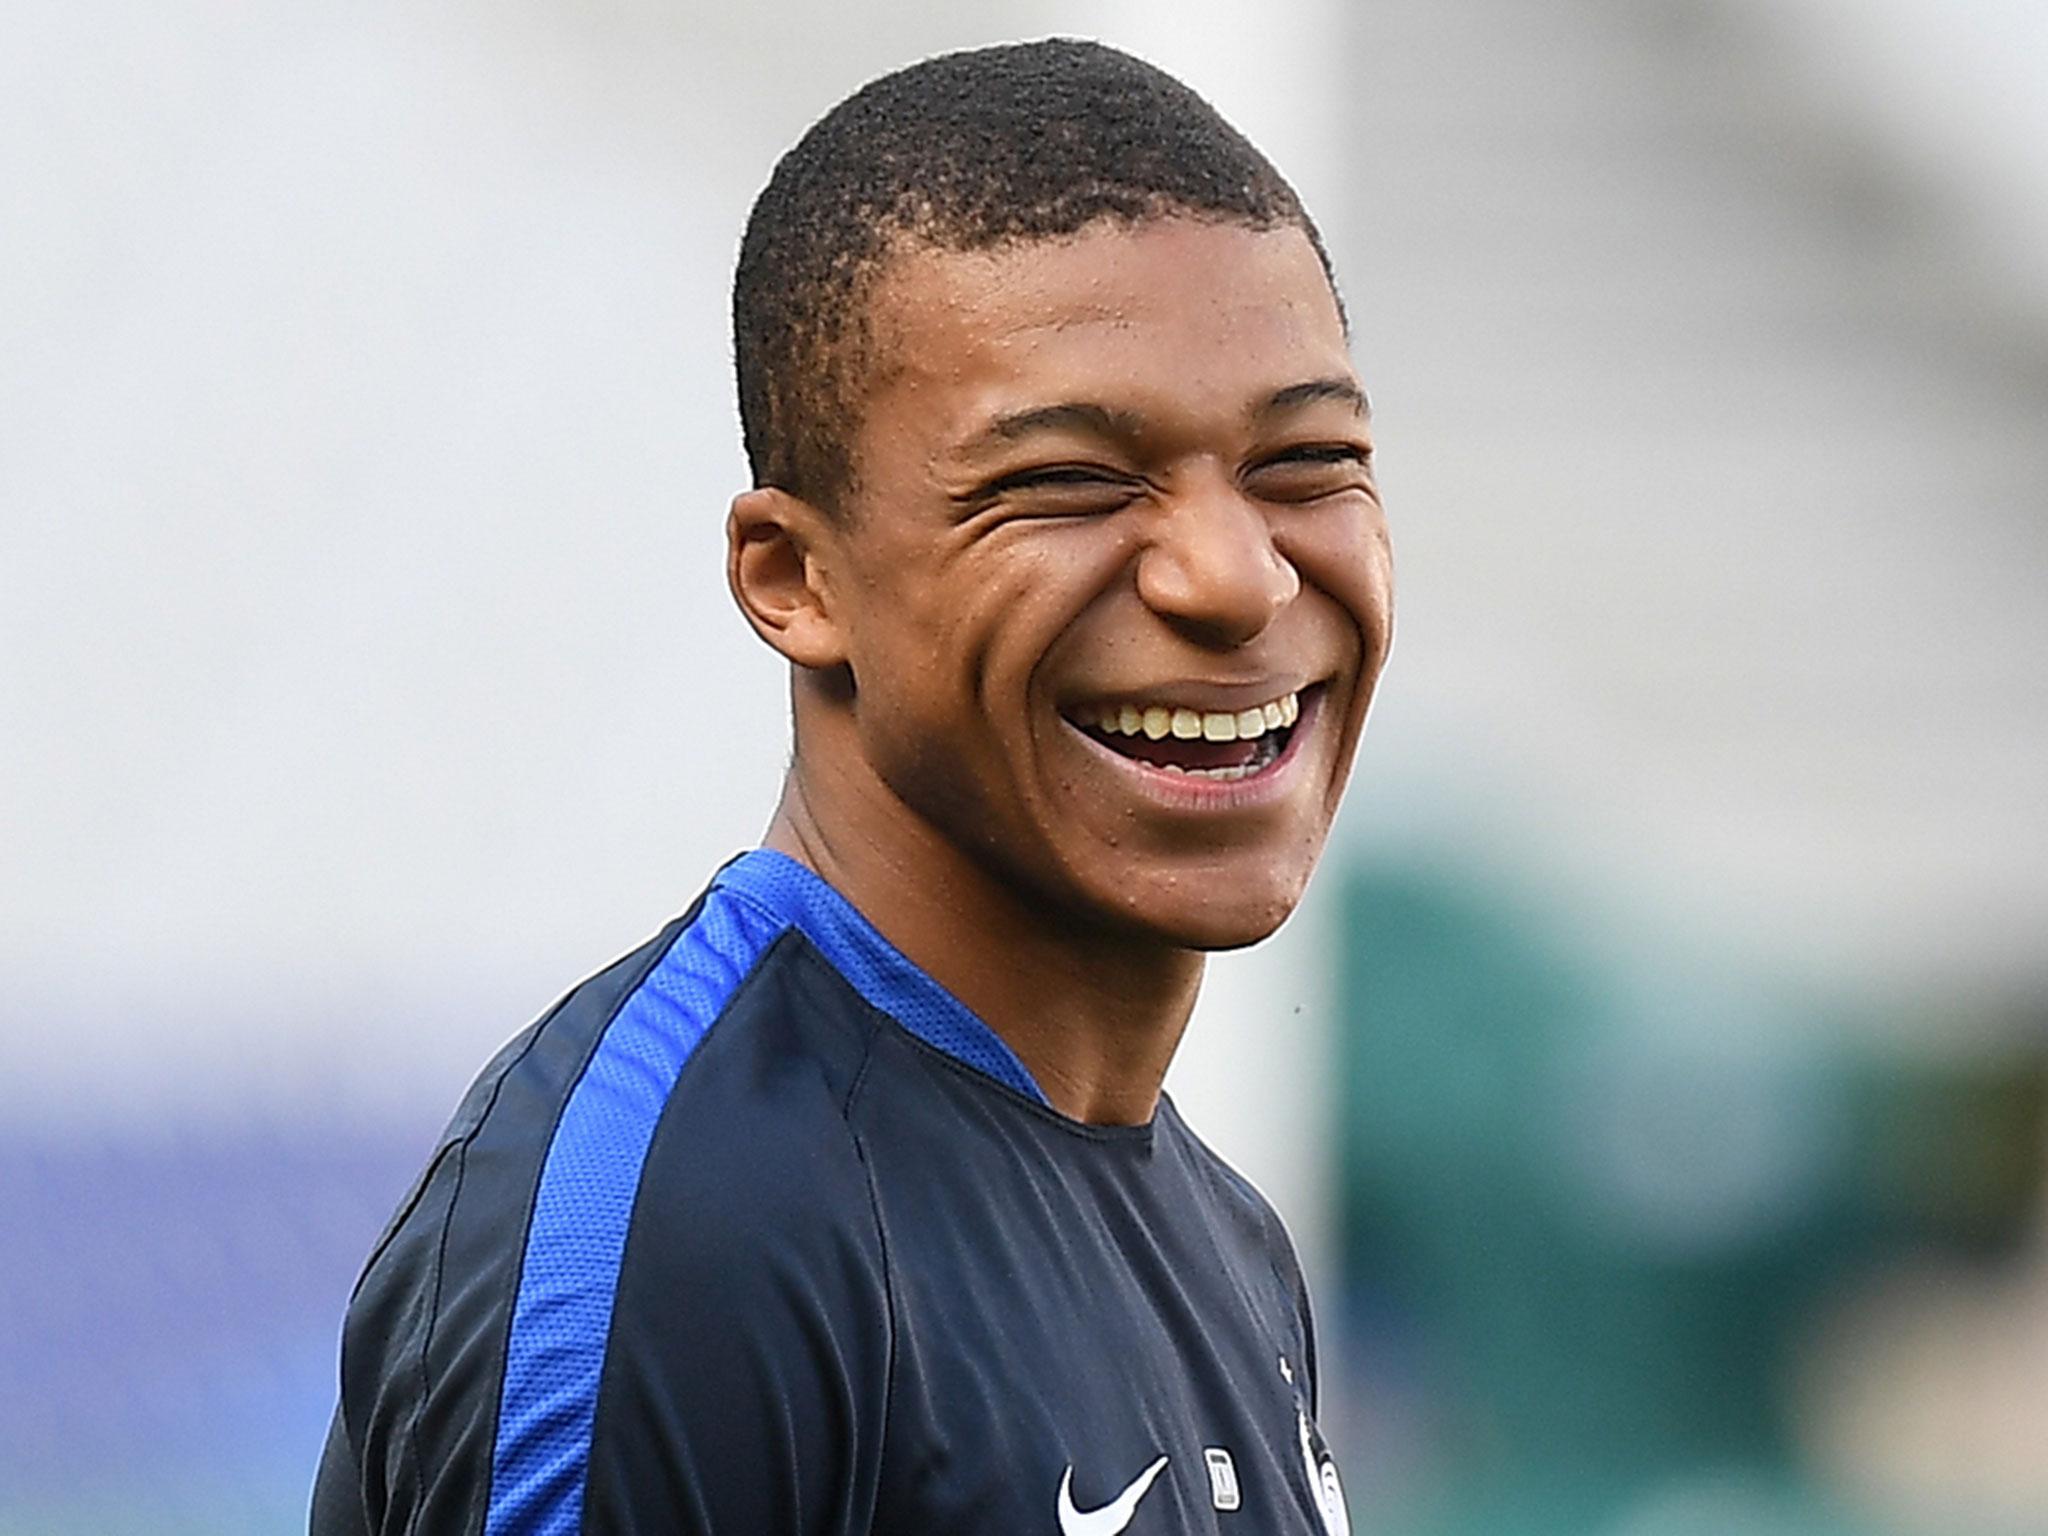 With Kylian Mbappe's imminent arrival Real Madrid have once again shown why they remain top of the transfer tree